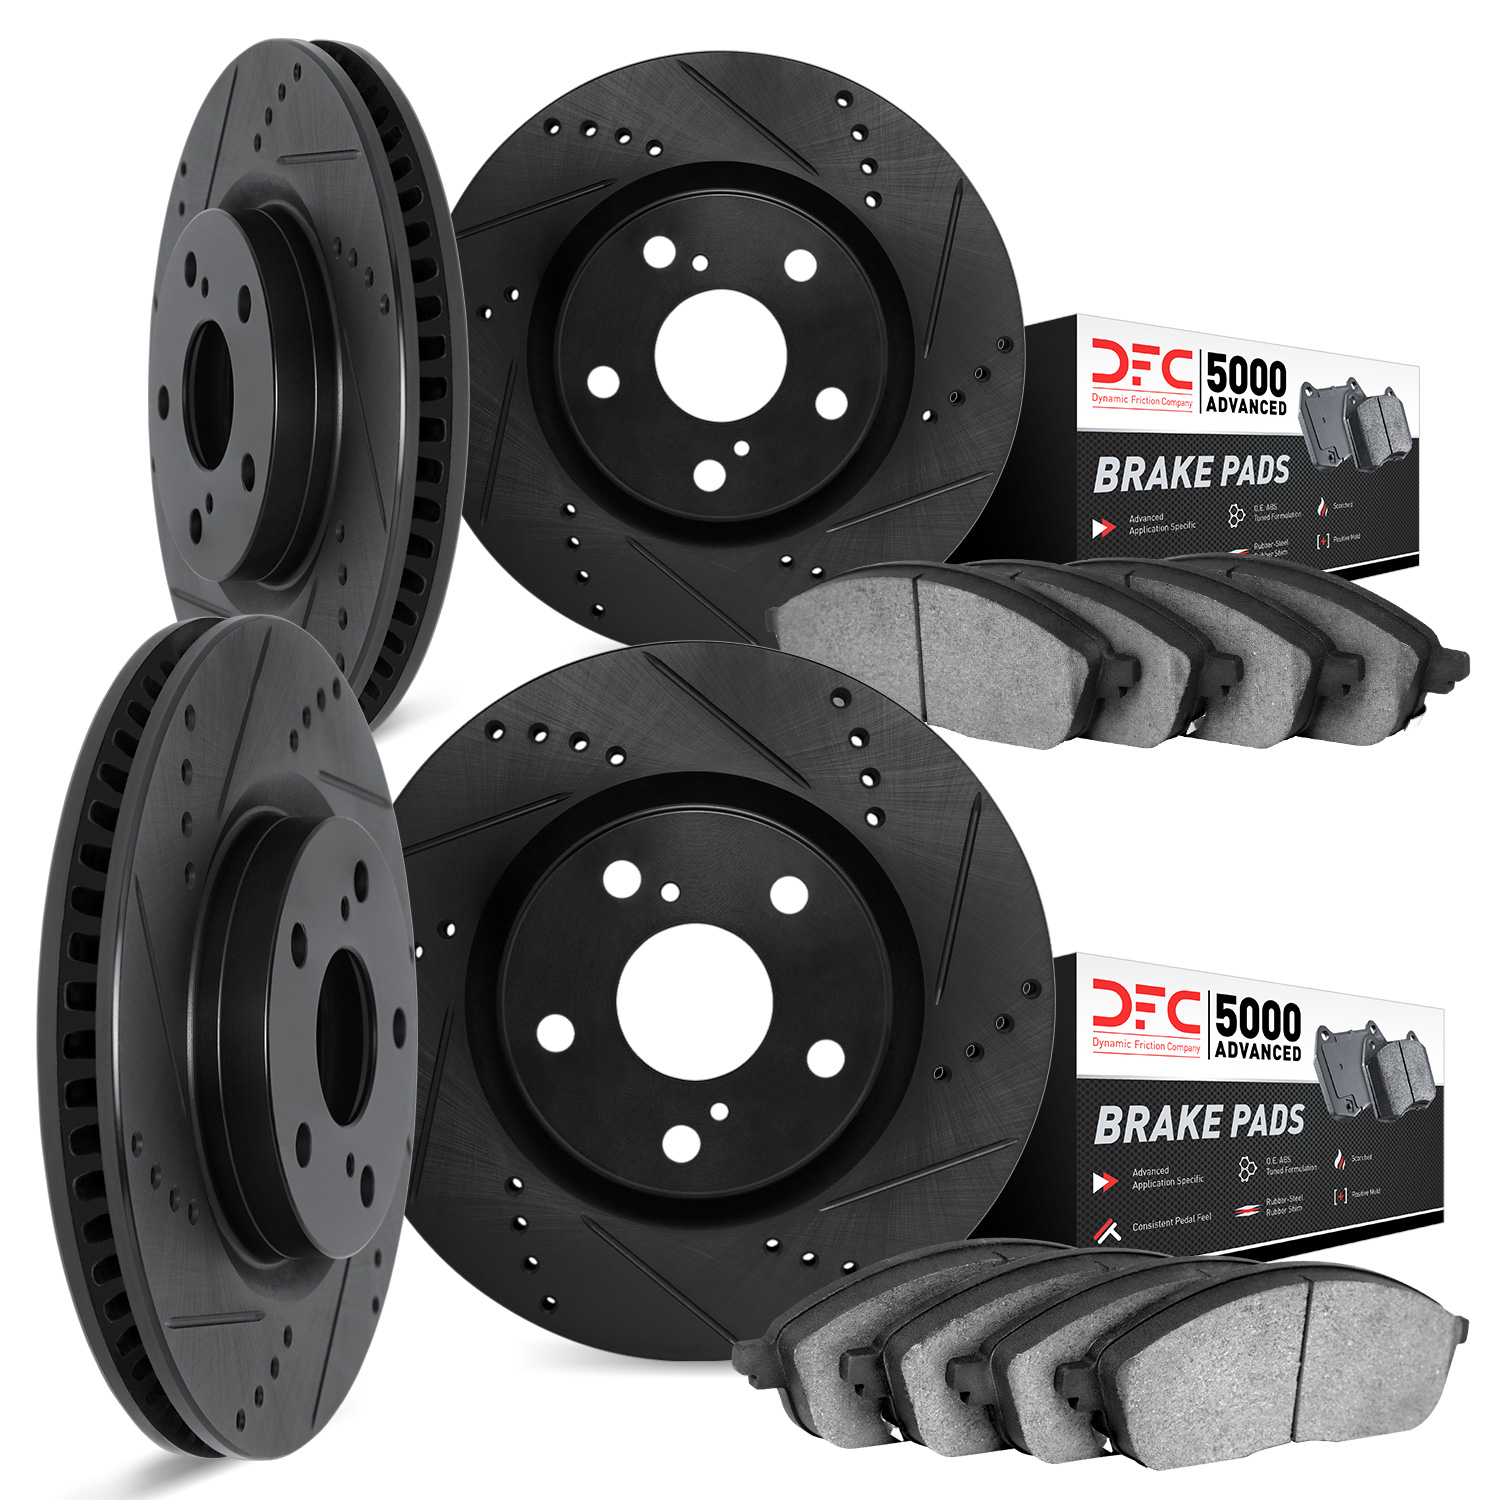 8504-47242 Drilled/Slotted Brake Rotors w/5000 Advanced Brake Pads Kit [Black], 1968-1969 GM, Position: Front and Rear